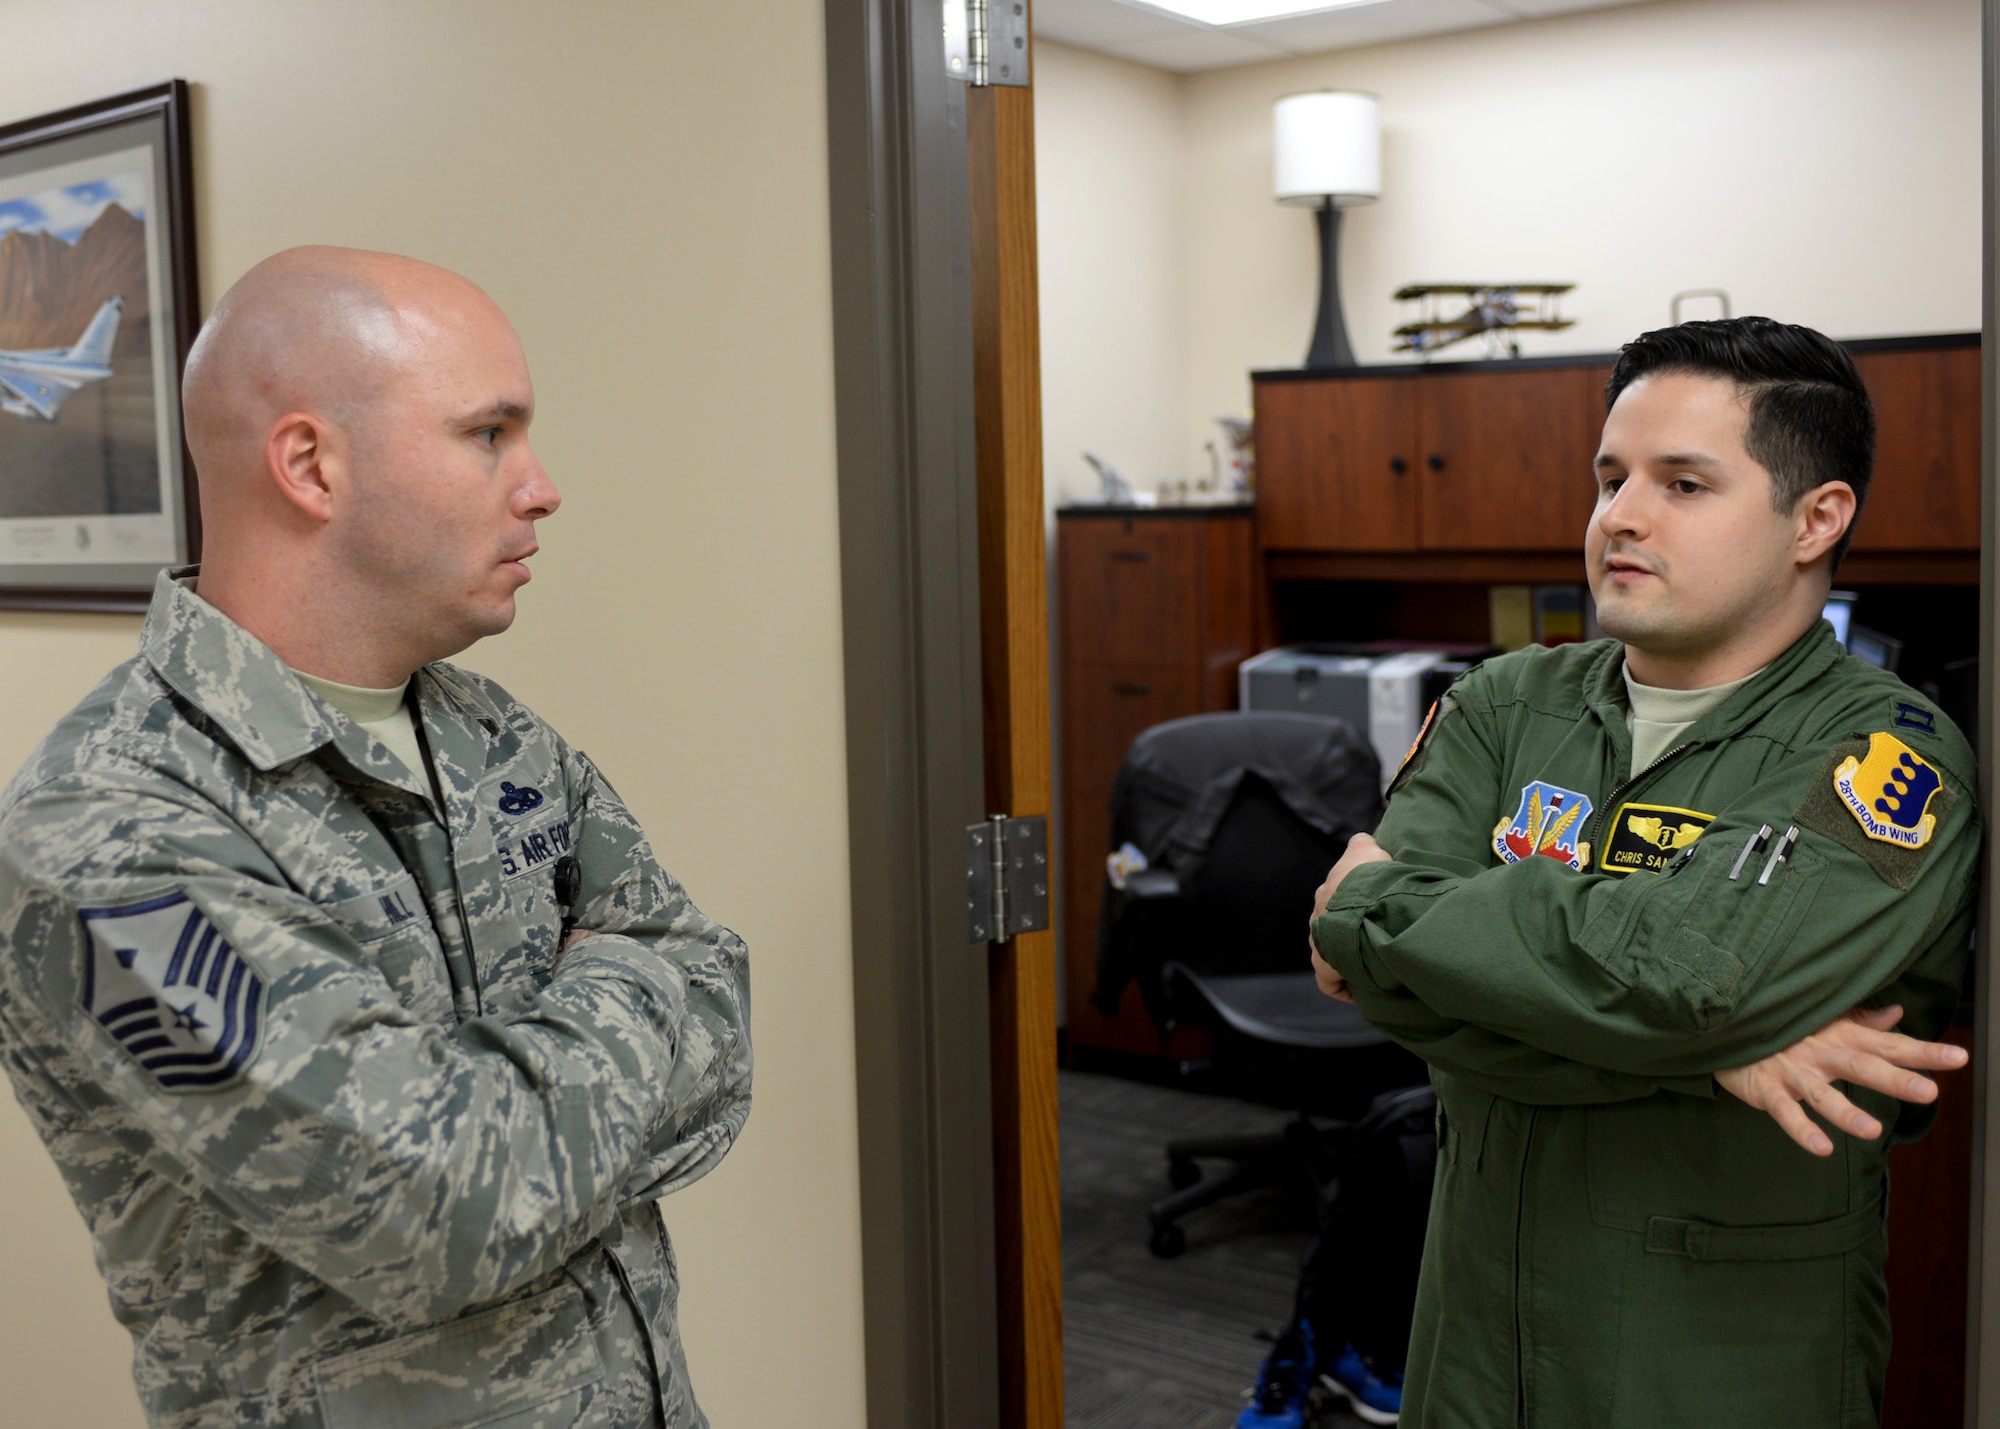 Master Sgt. Patrick Hill, 28th Medical Group first sergeant, visits with Capt. Christopher Sandoval, 28th Medical Operations Squadron flight surgeon, at Ellsworth Air Force Base, S.D., Nov. 13, 2014. The first sergeant’s primary job is making sure he is properly taking care of his Airmen and leadership in his unit. (U.S. Air Force photo by Senior Airman Anania Tekurio/Released) 